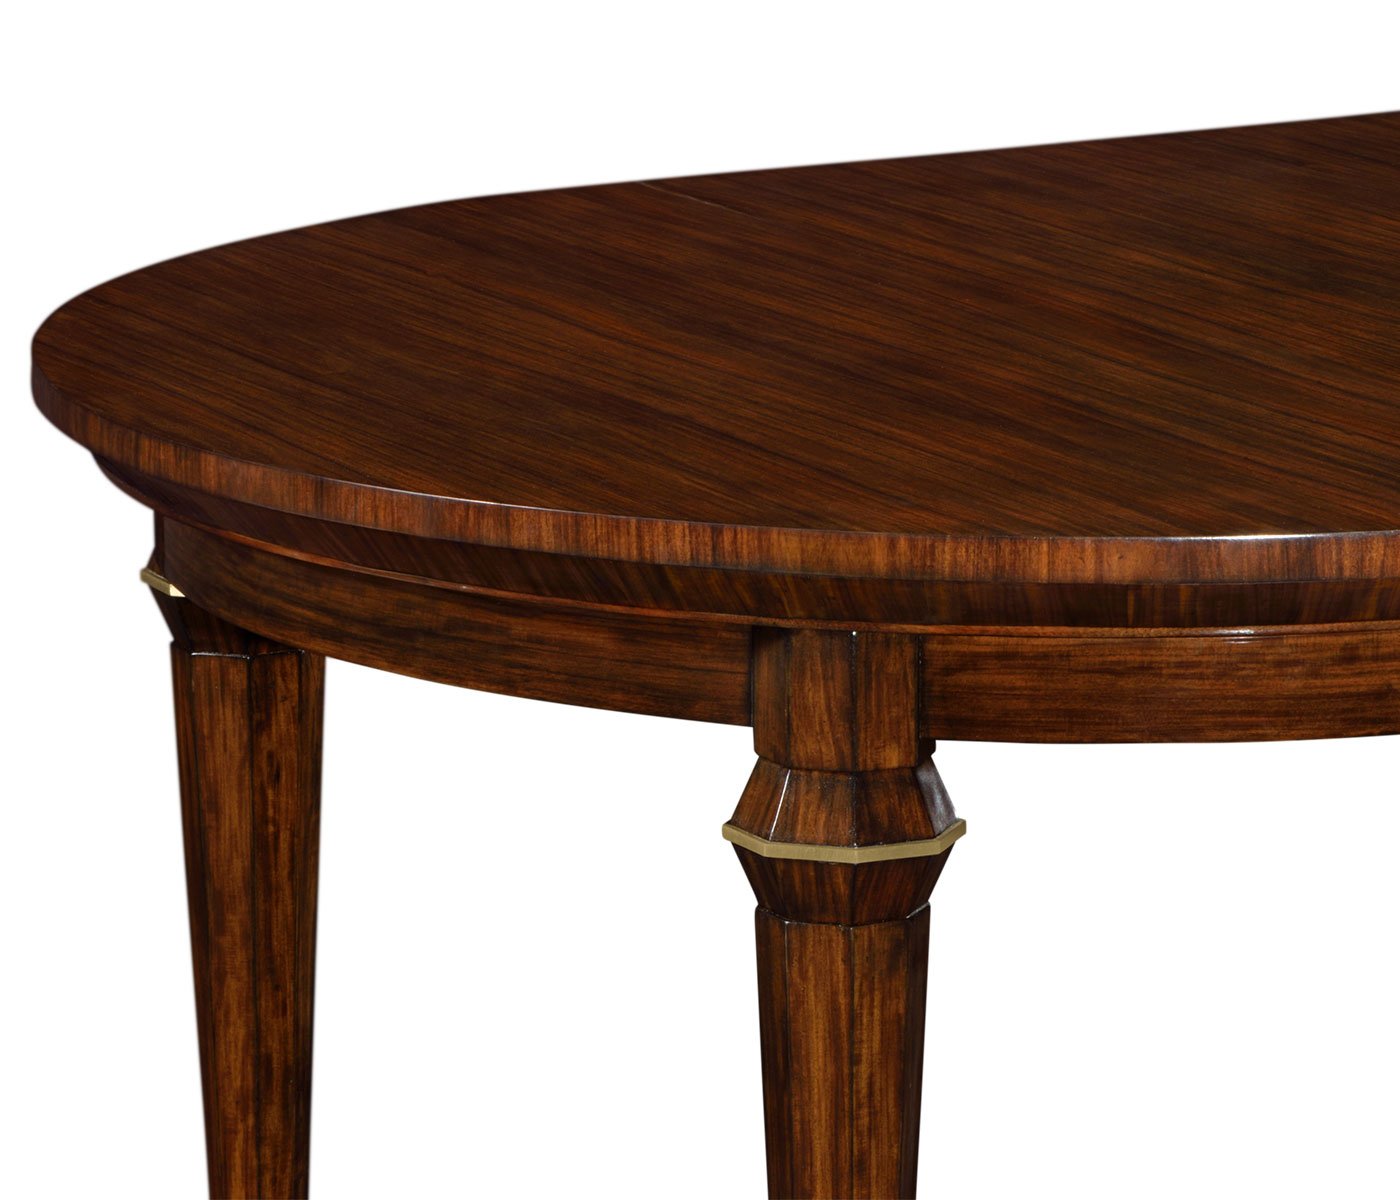 Load image into Gallery viewer, Round Extendable Dining Table Calista
